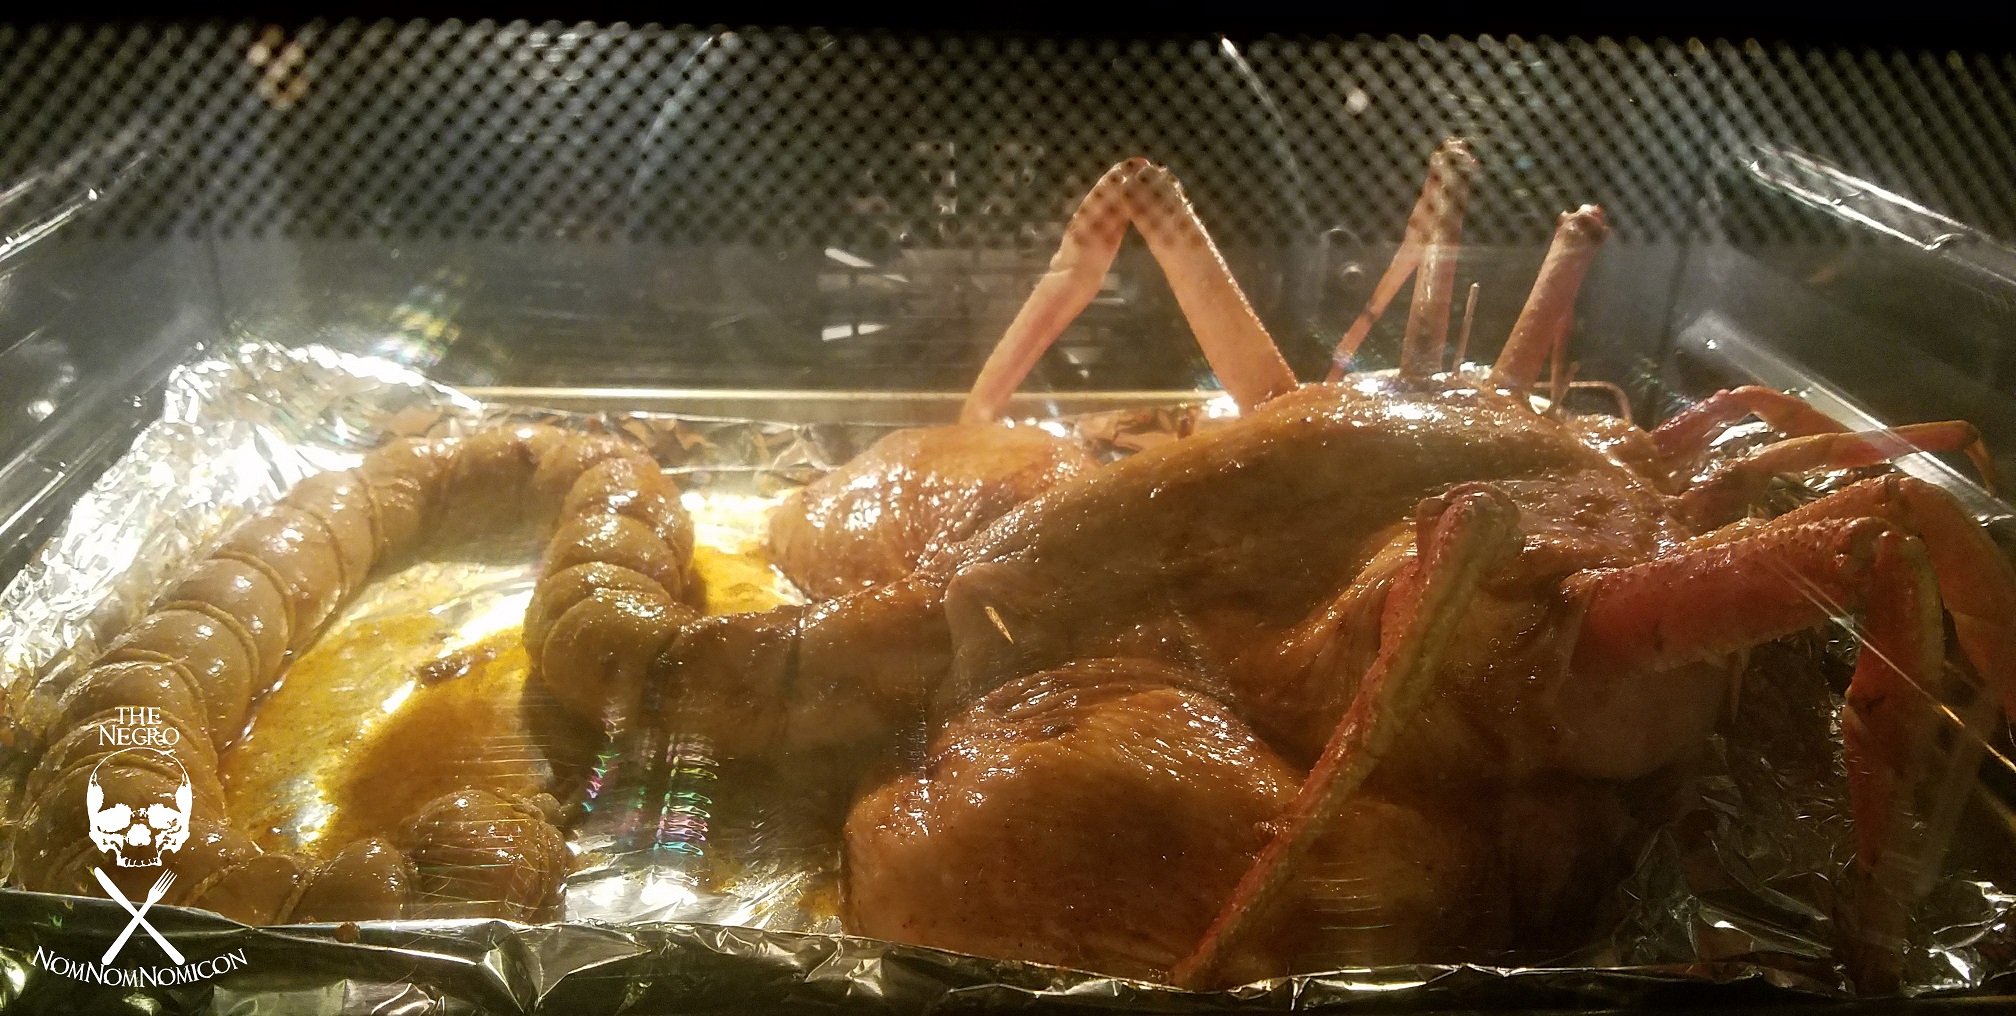 The edible Facehugger in the oven